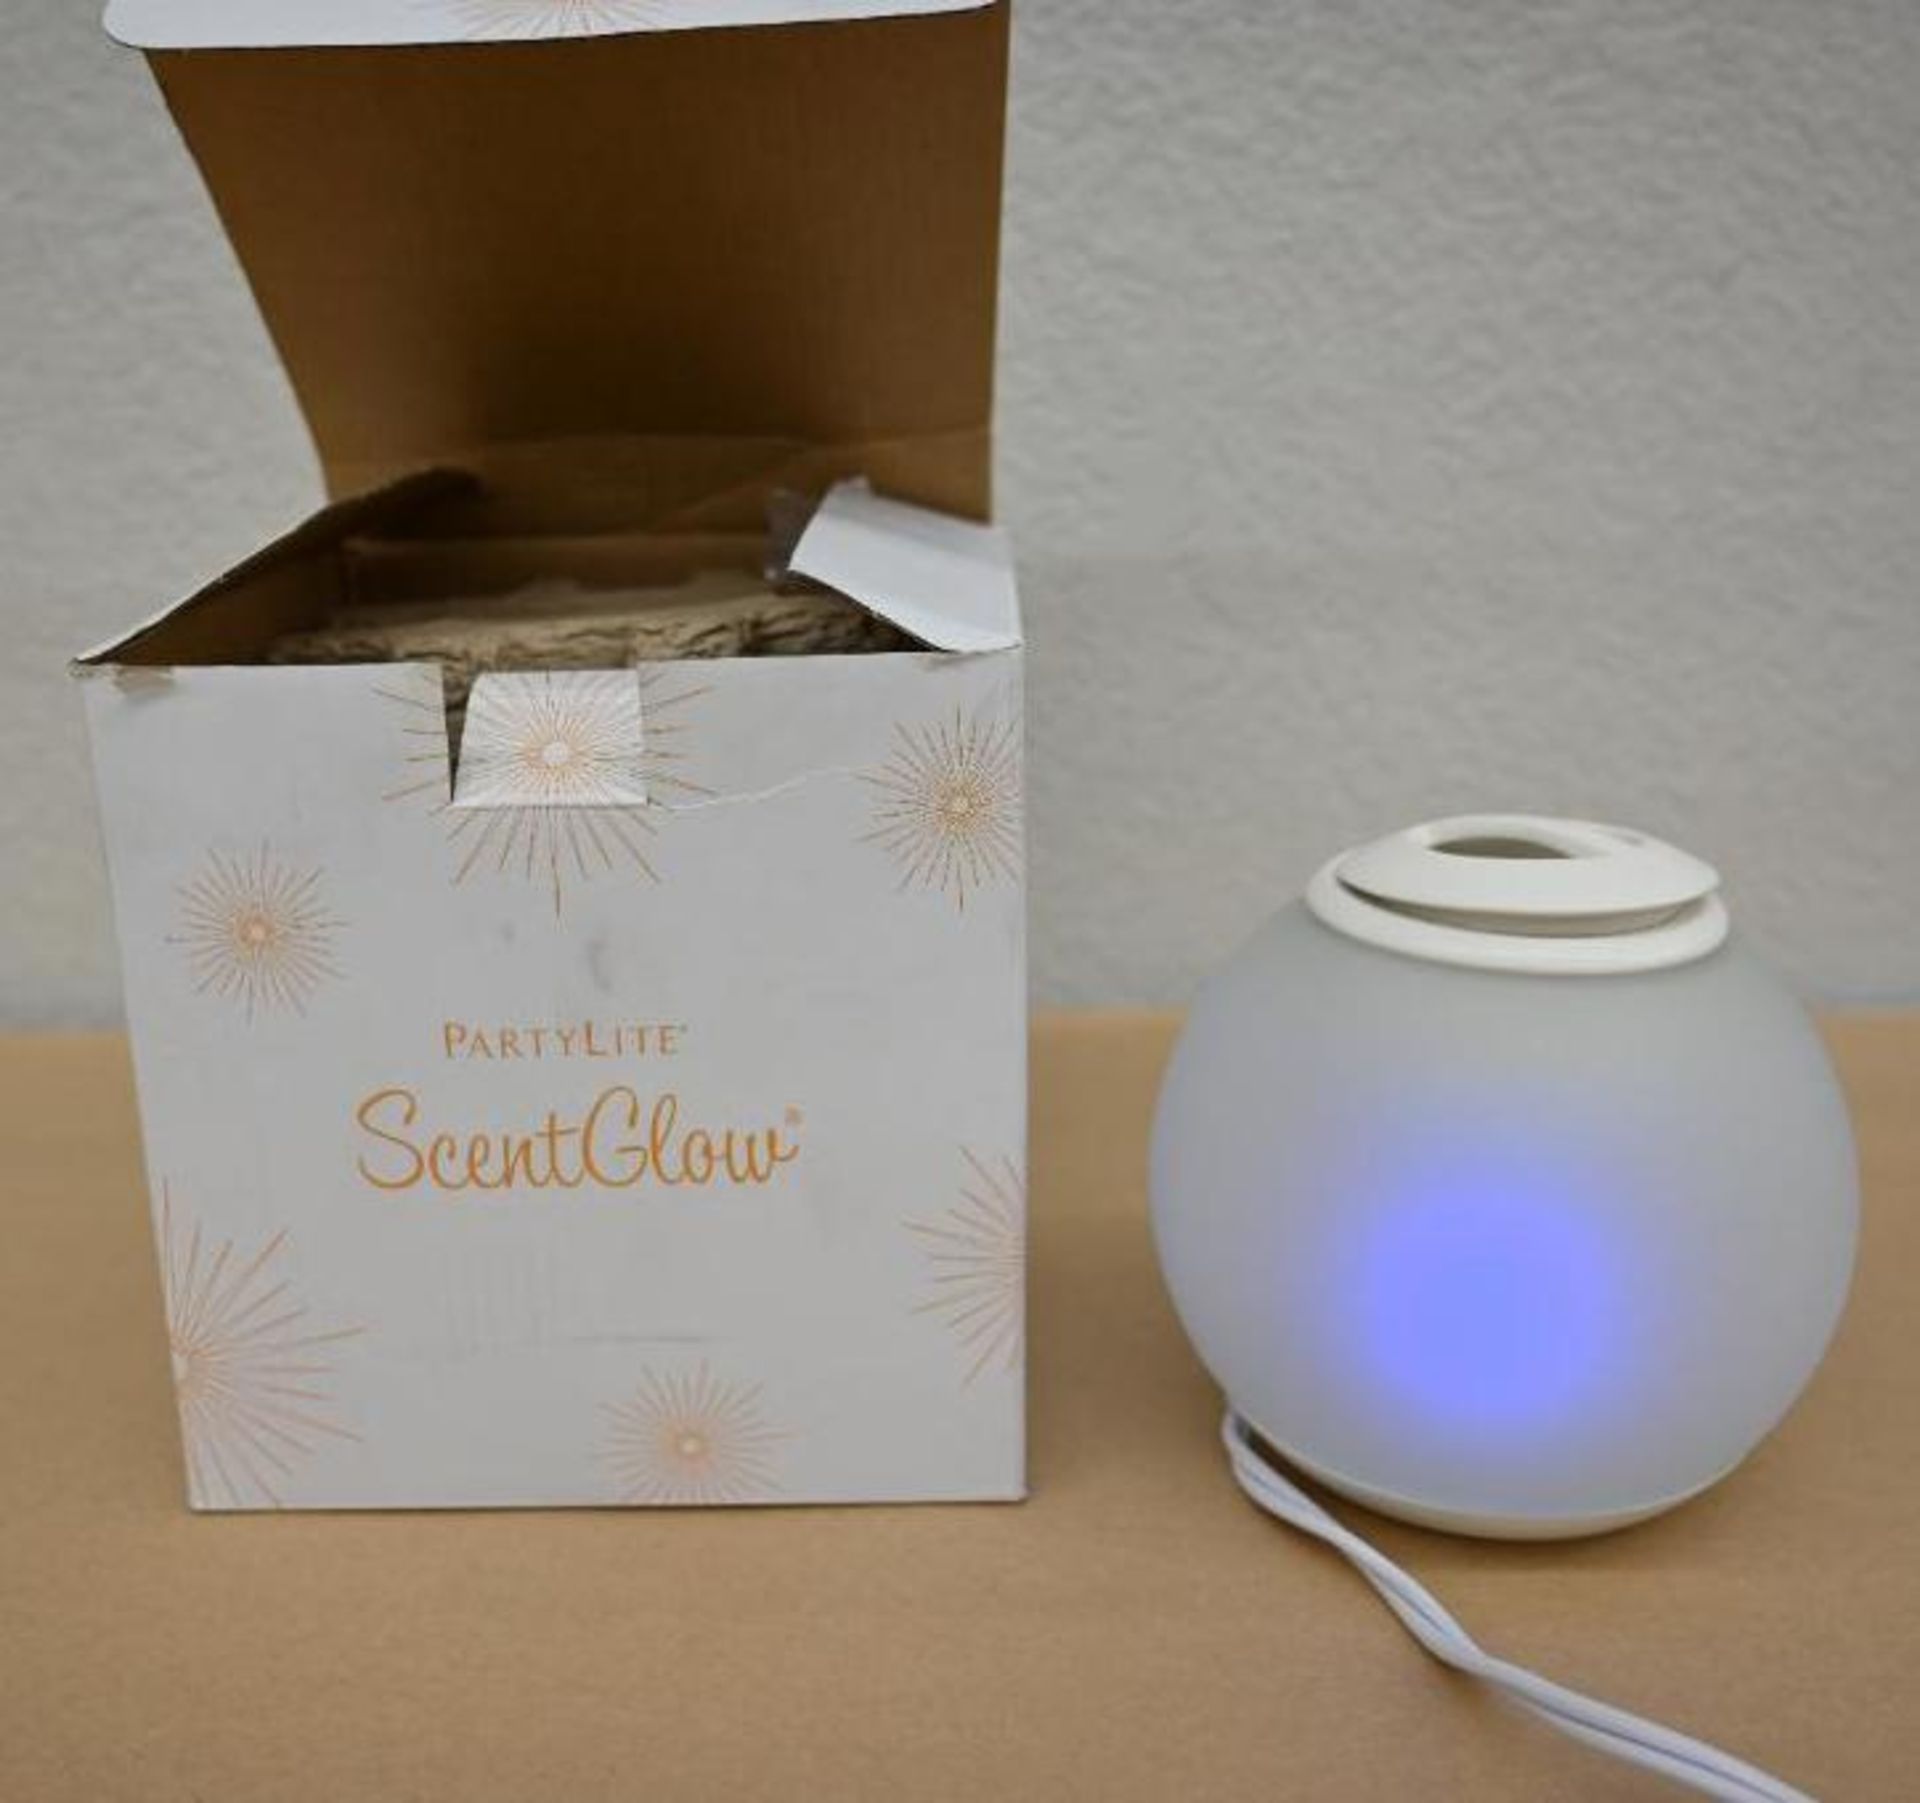 Party Lite Scent Glow - Image 2 of 5